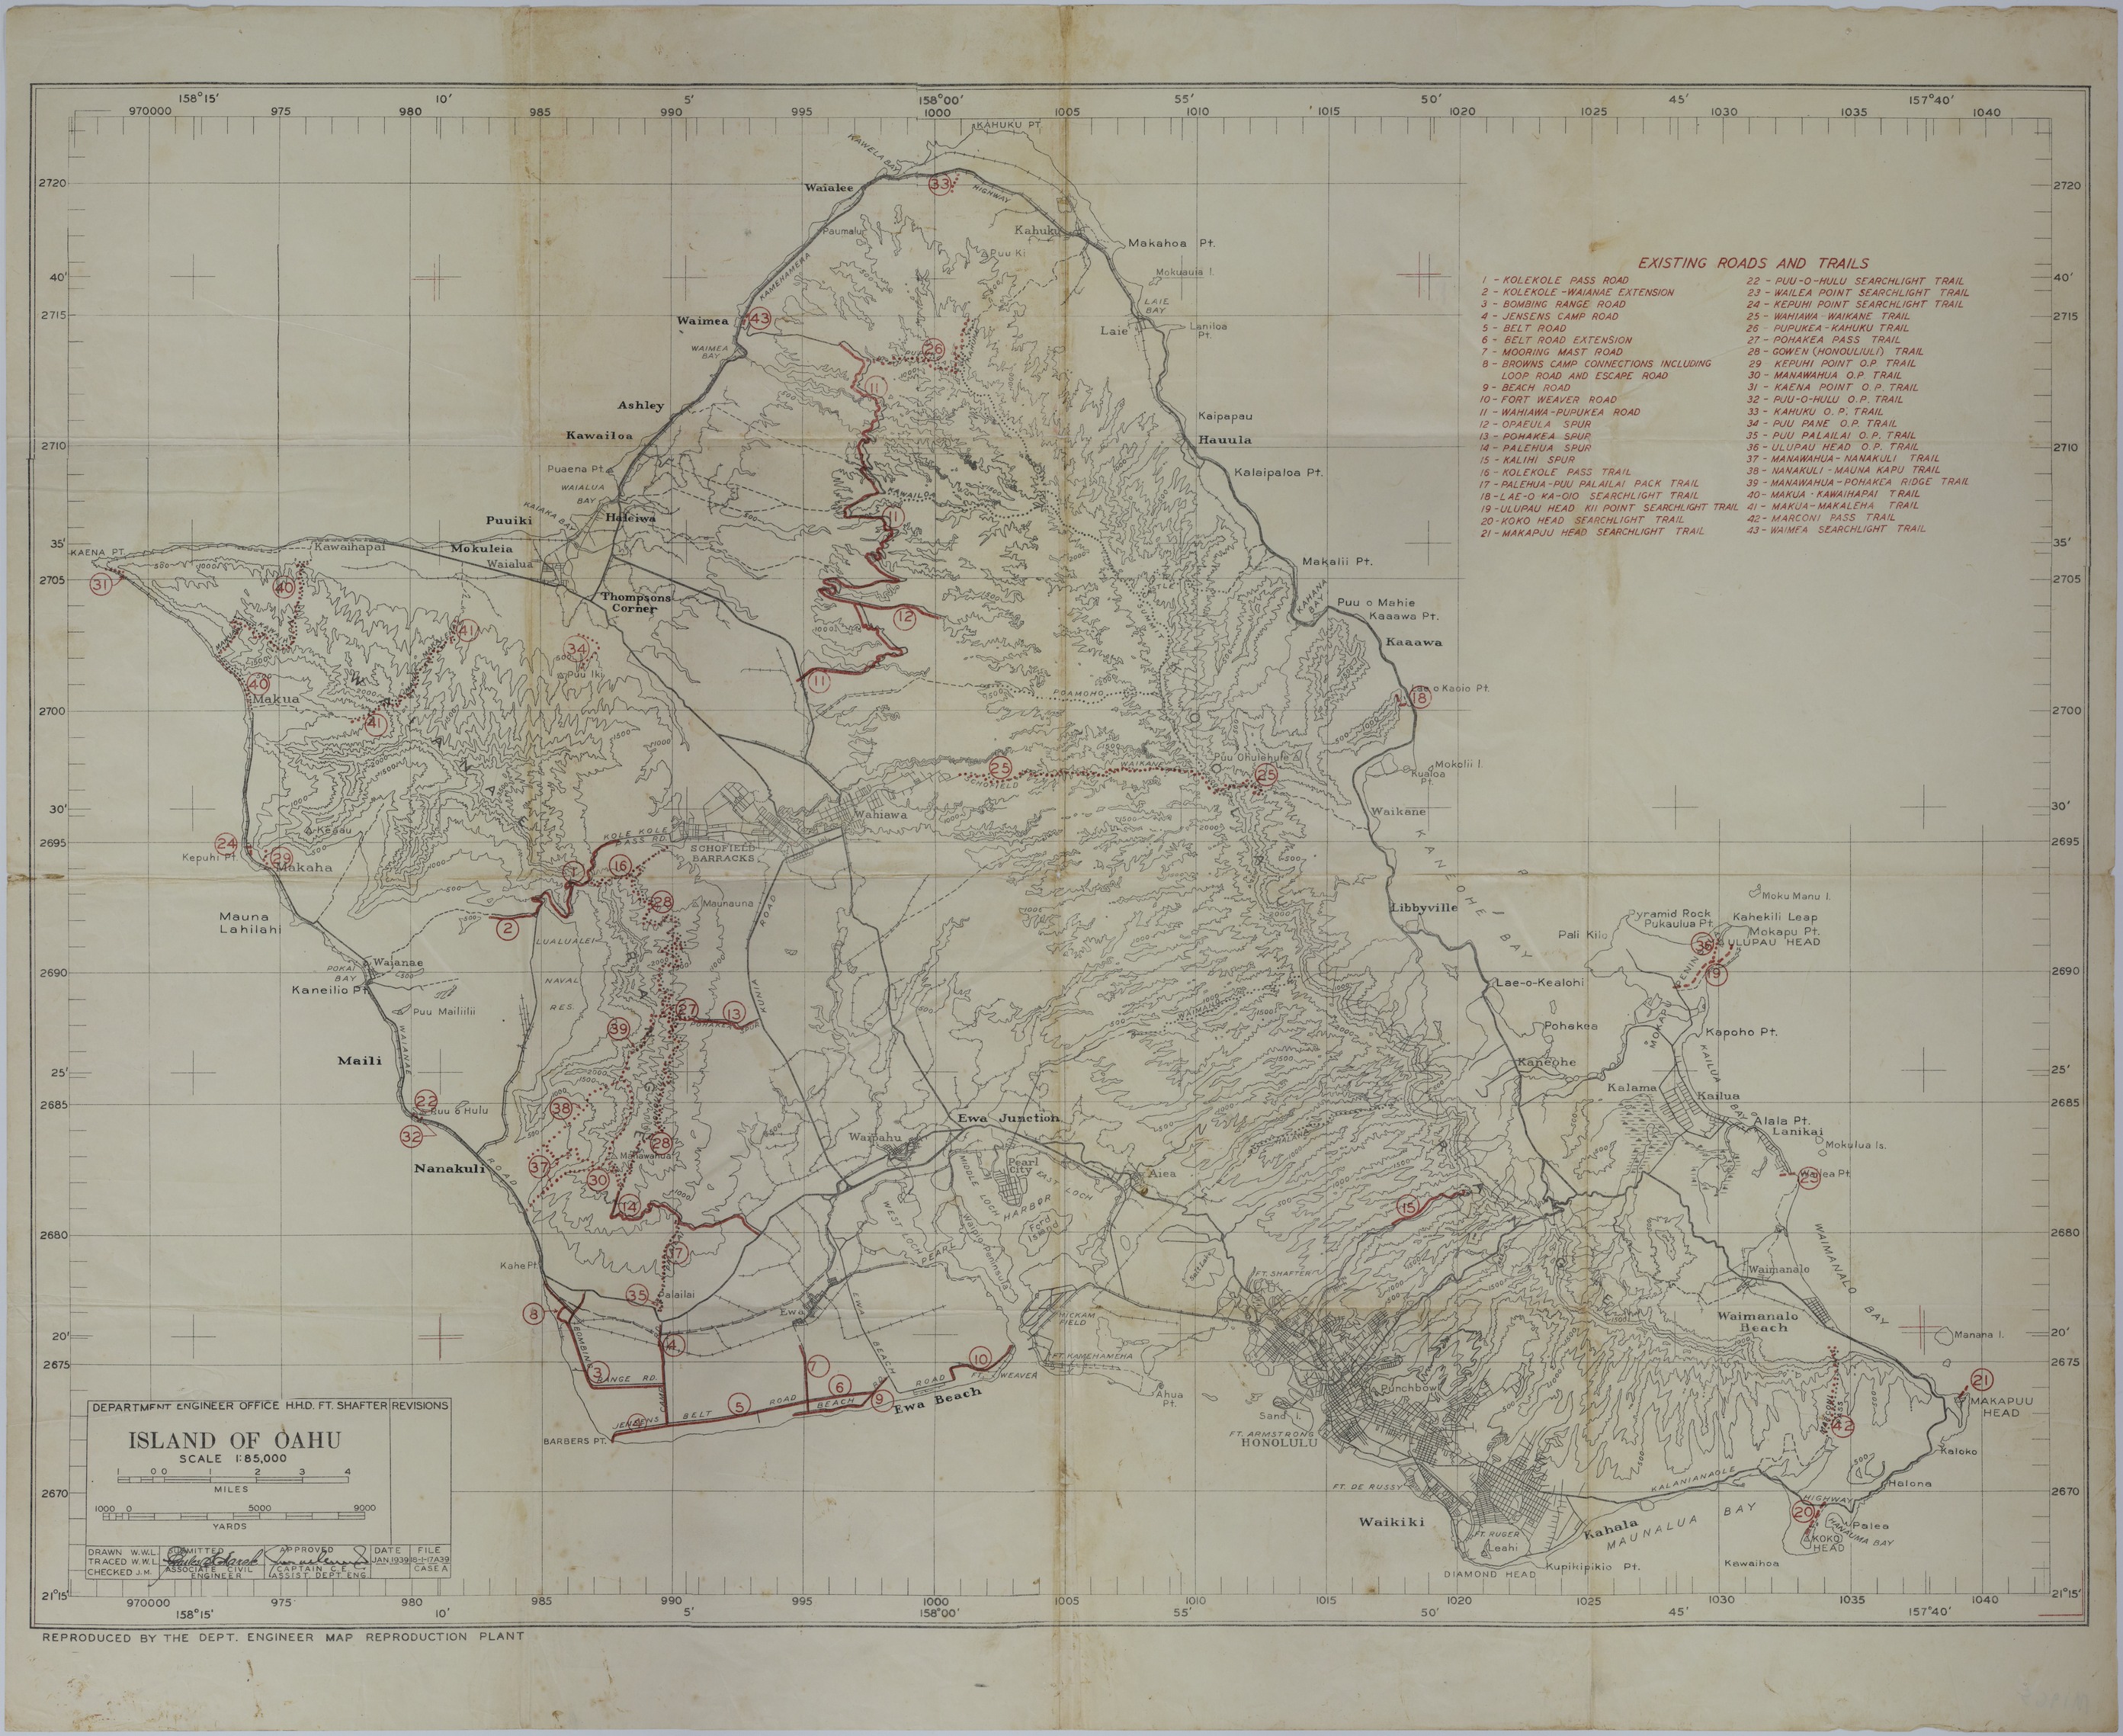 Map of the Island of Oahu